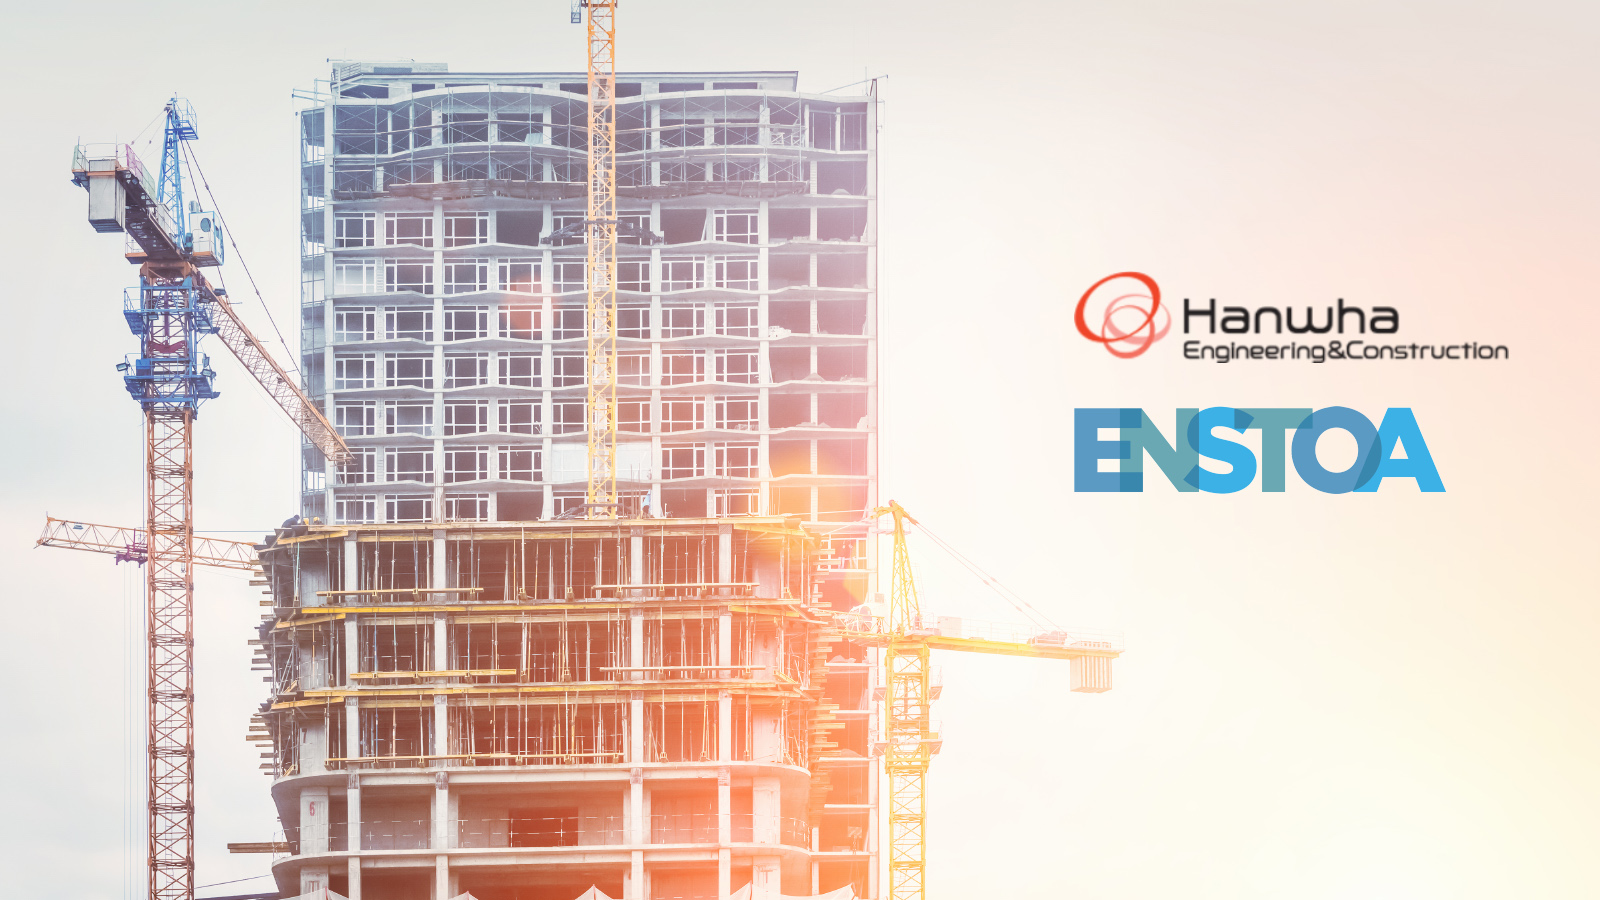 Hanwha Engineering & Construction Enlists Enstoa to Digitally Transform Their Business 